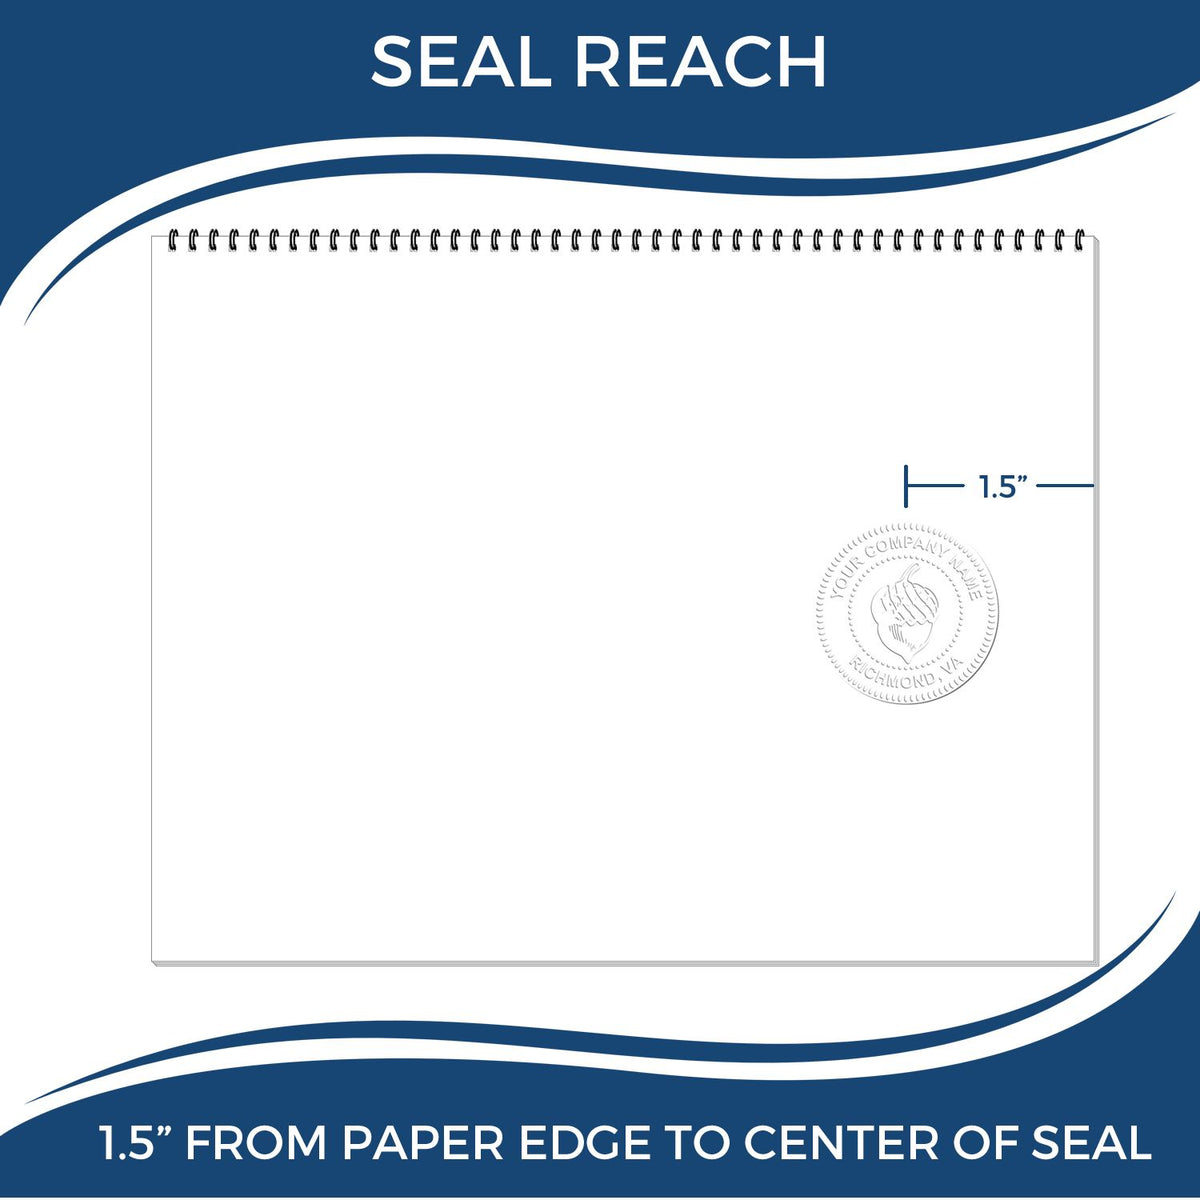 An infographic showing the seal reach which is represented by a ruler and a miniature seal image of the Hybrid Massachusetts Engineer Seal